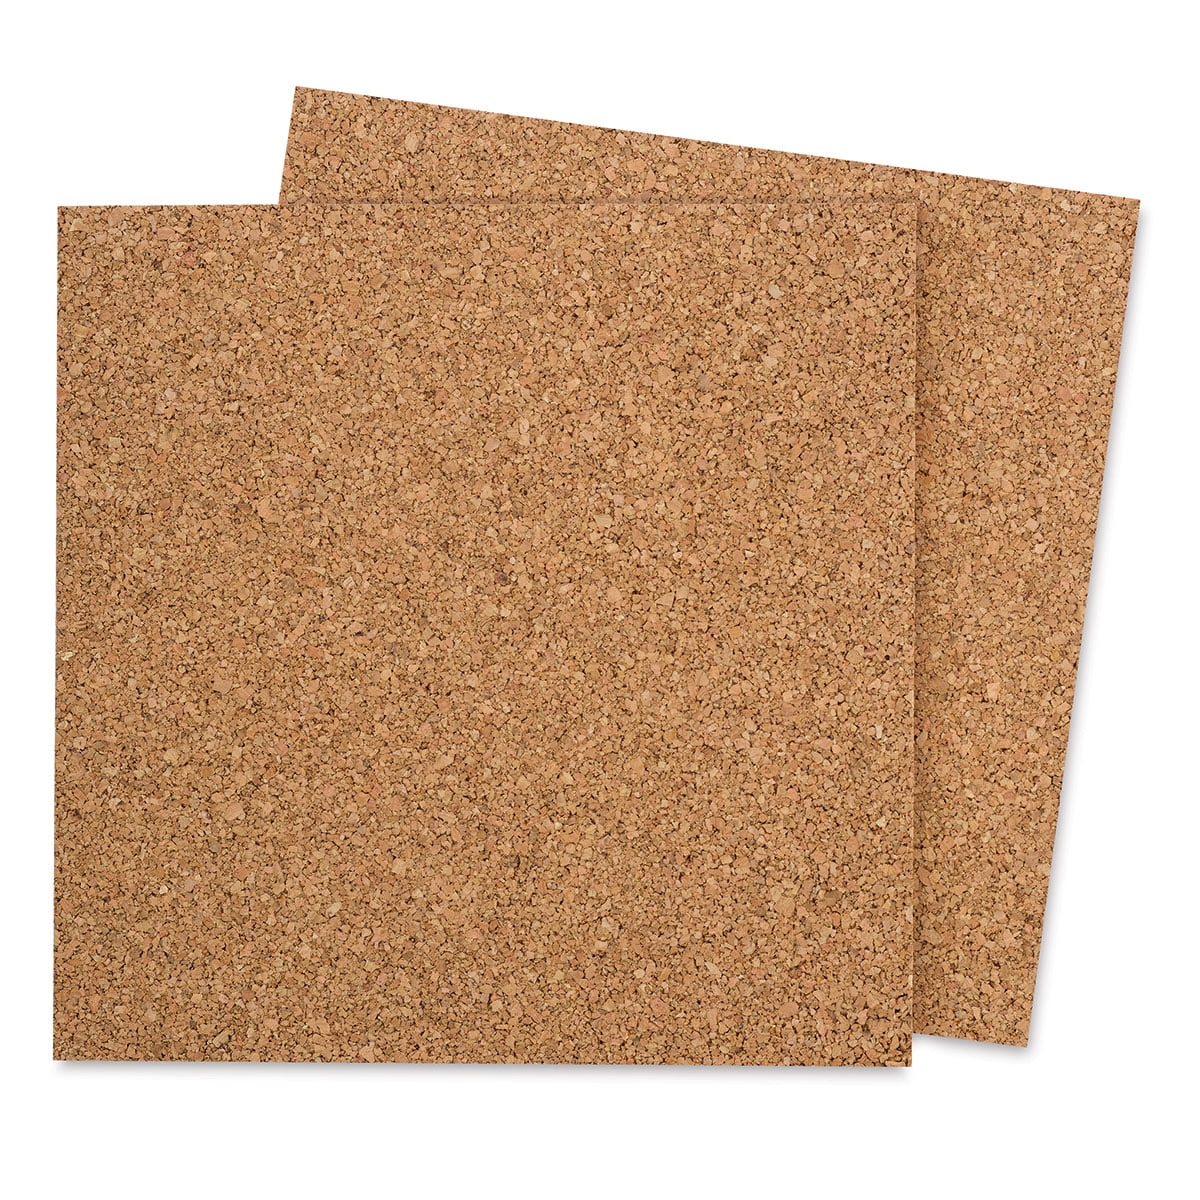 Midwest Products 3048 Project Cork Sheets, 0.125 by 8.5 by 11-Inch